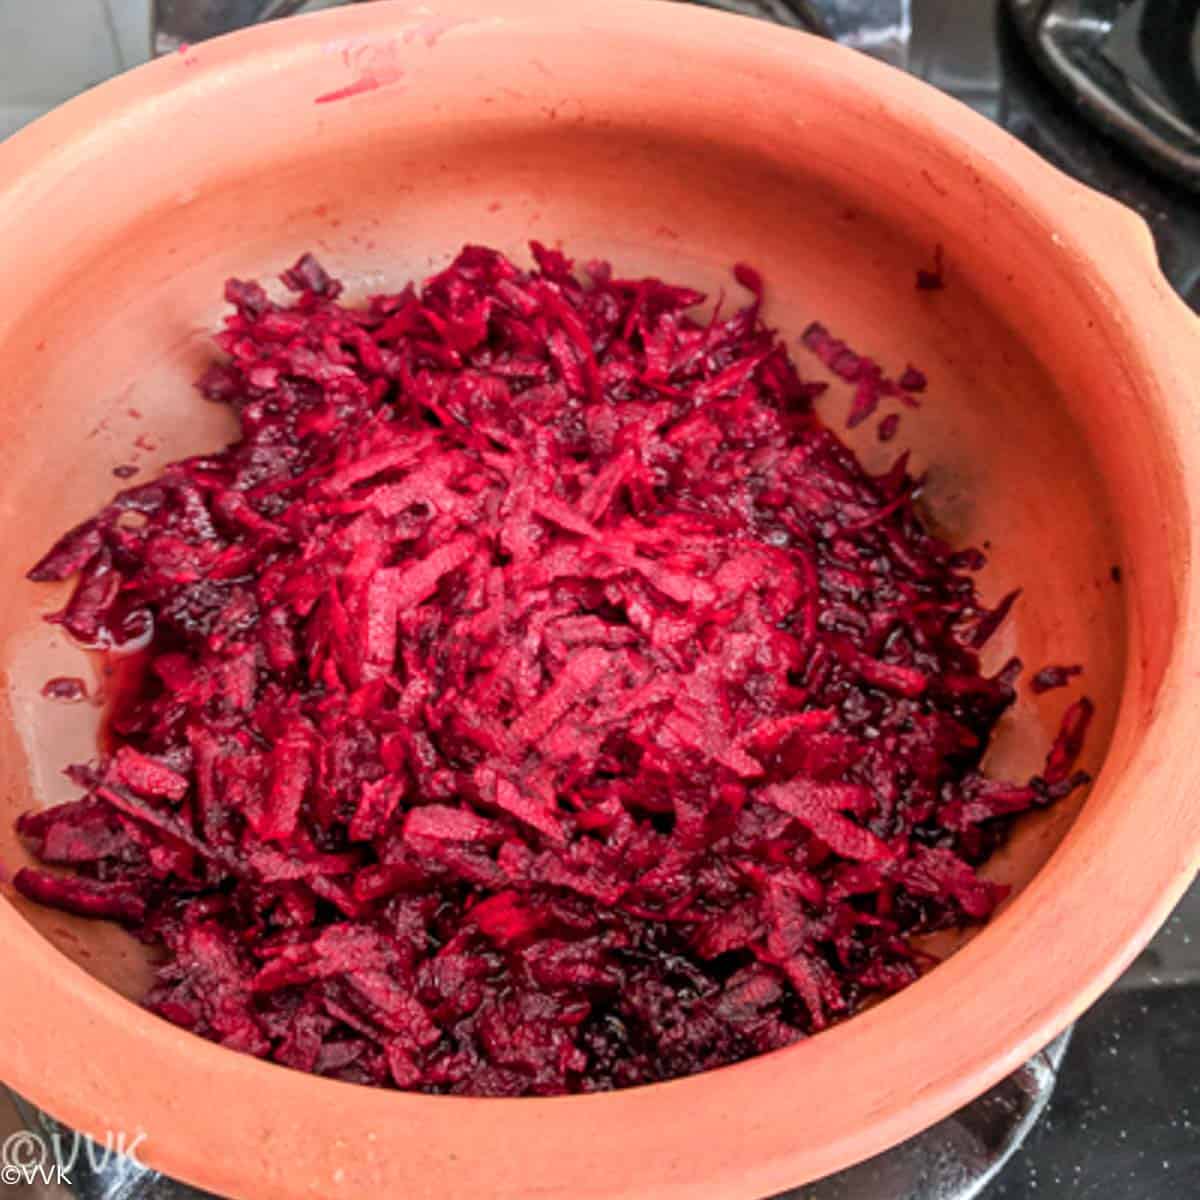 Cooking beets